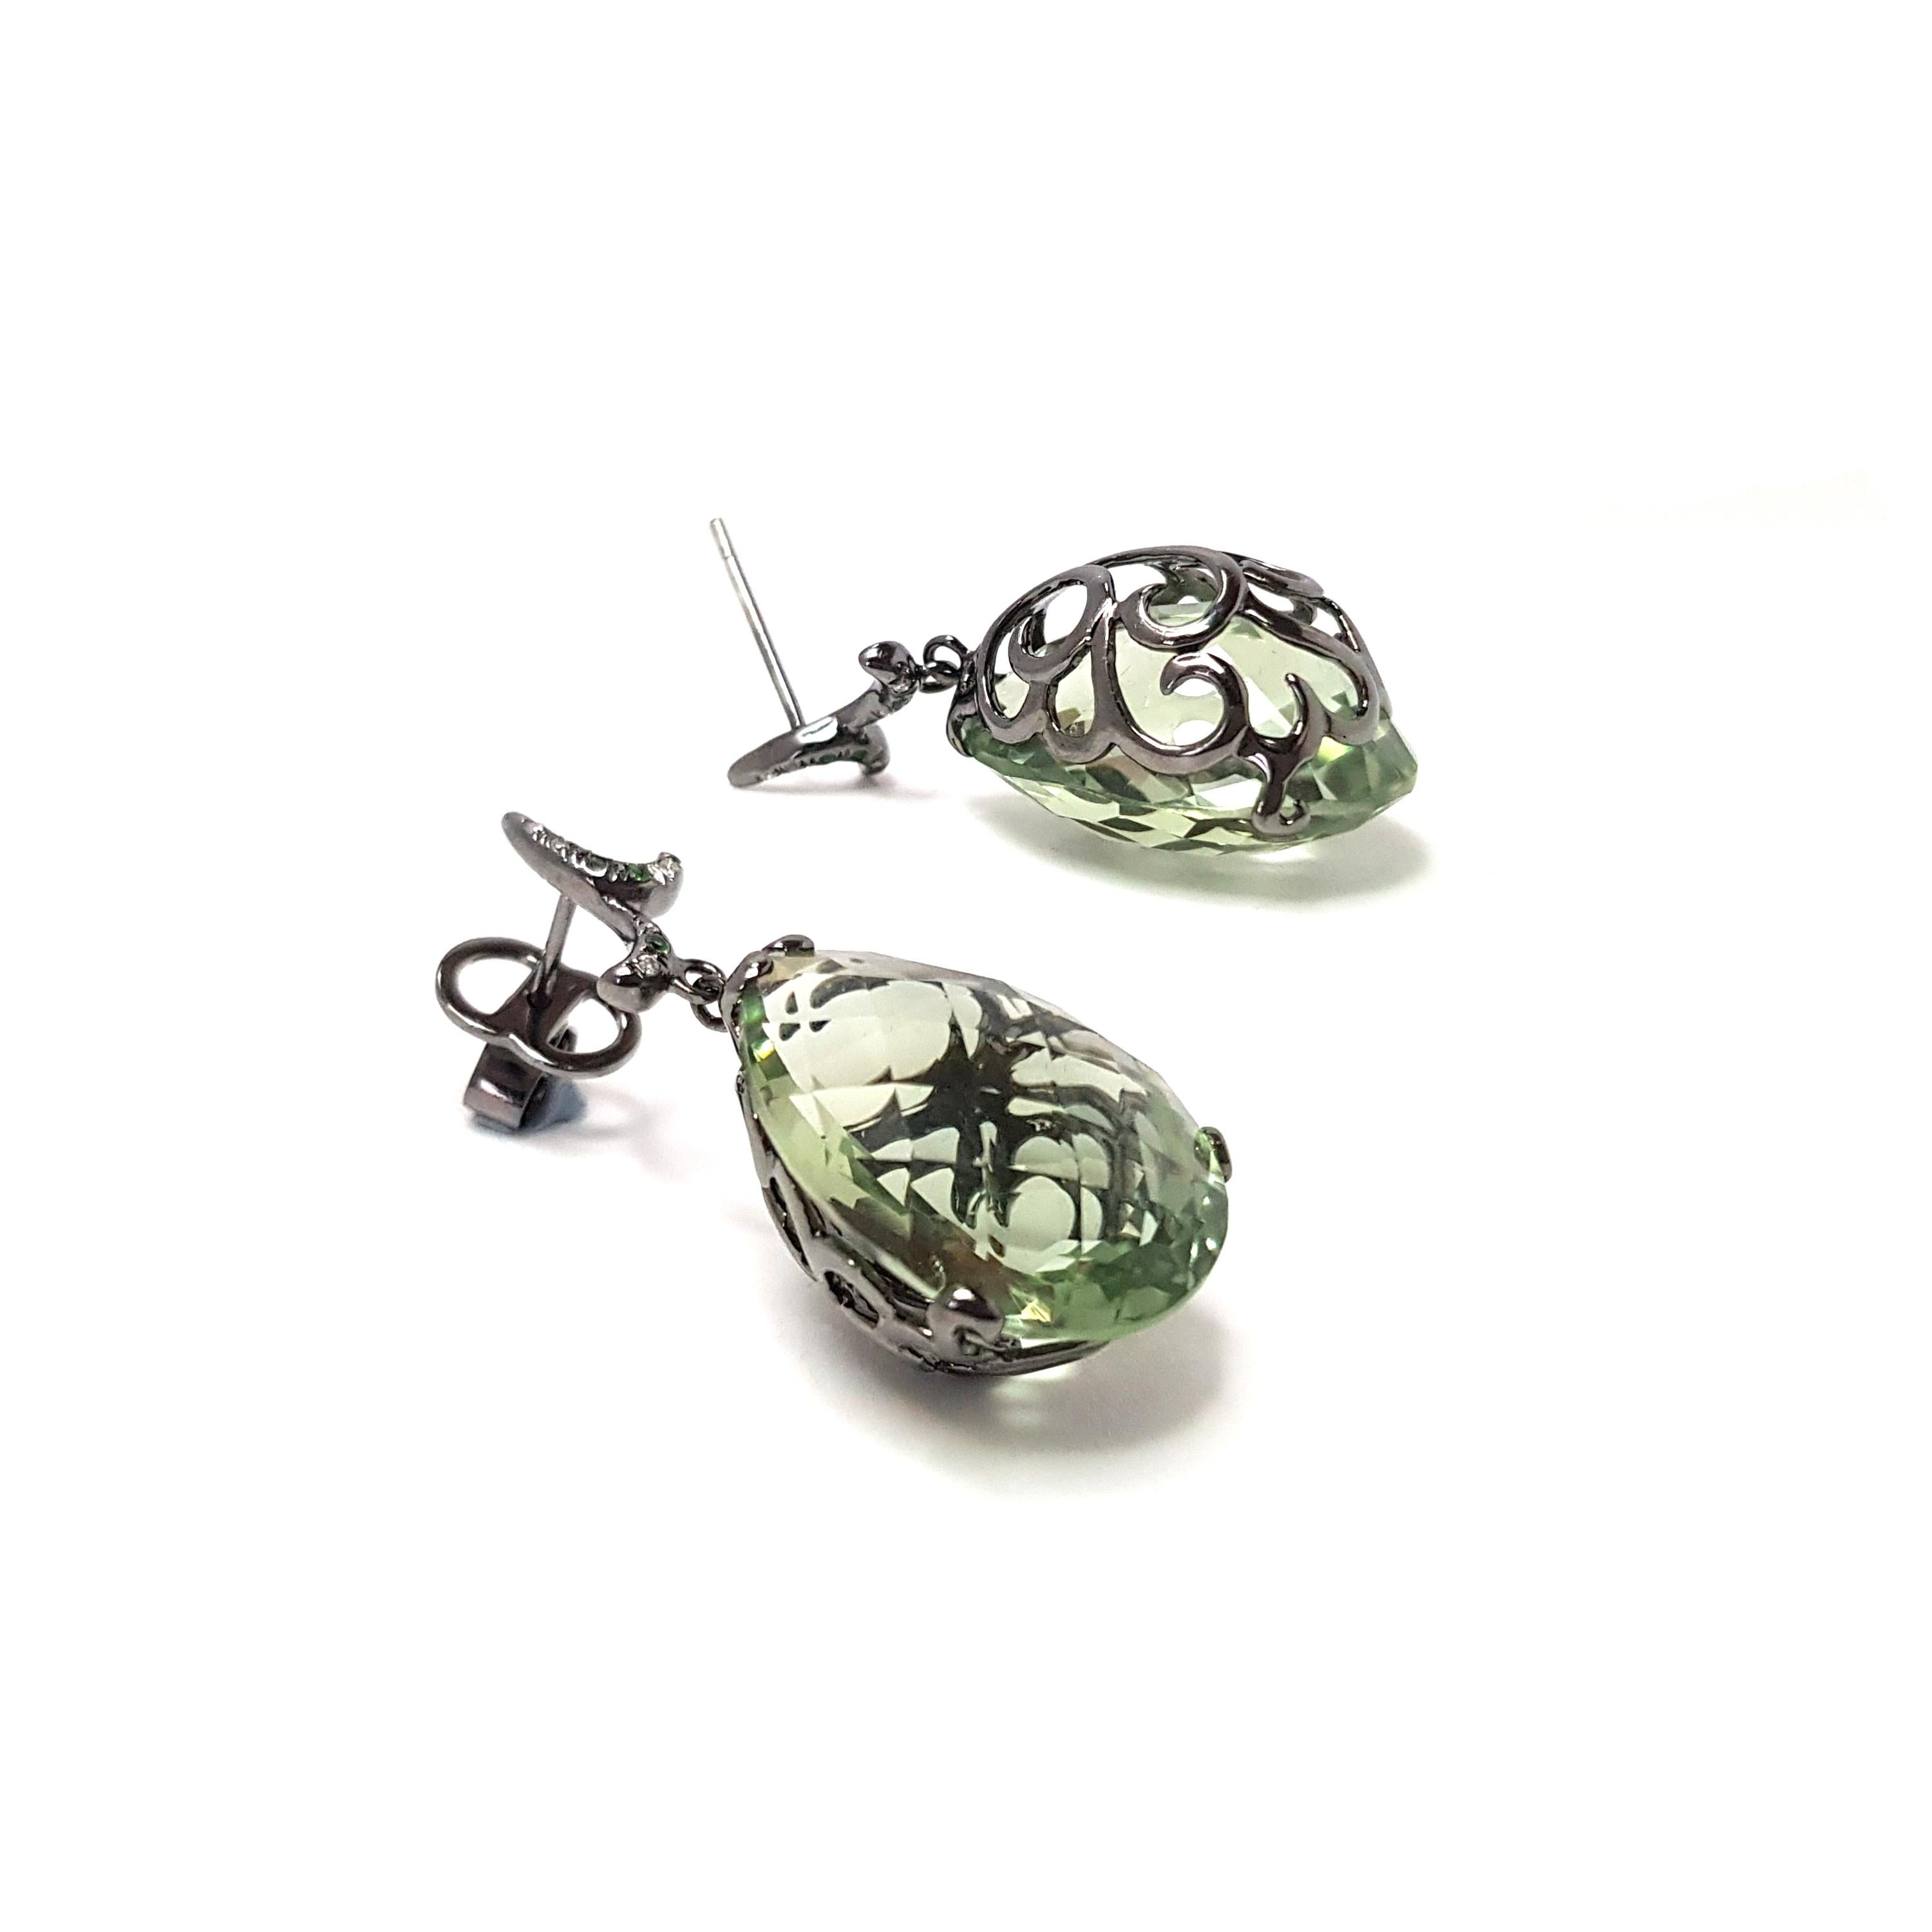 Description:
Whispering small pear stone drop earrings with 8ct green amethyst and 0.04ct diamonds, set in a black rhodium on 18ct white gold filigree setting.

Inspiration:
Emulating femininity and glamour, the Whispering collection is full of